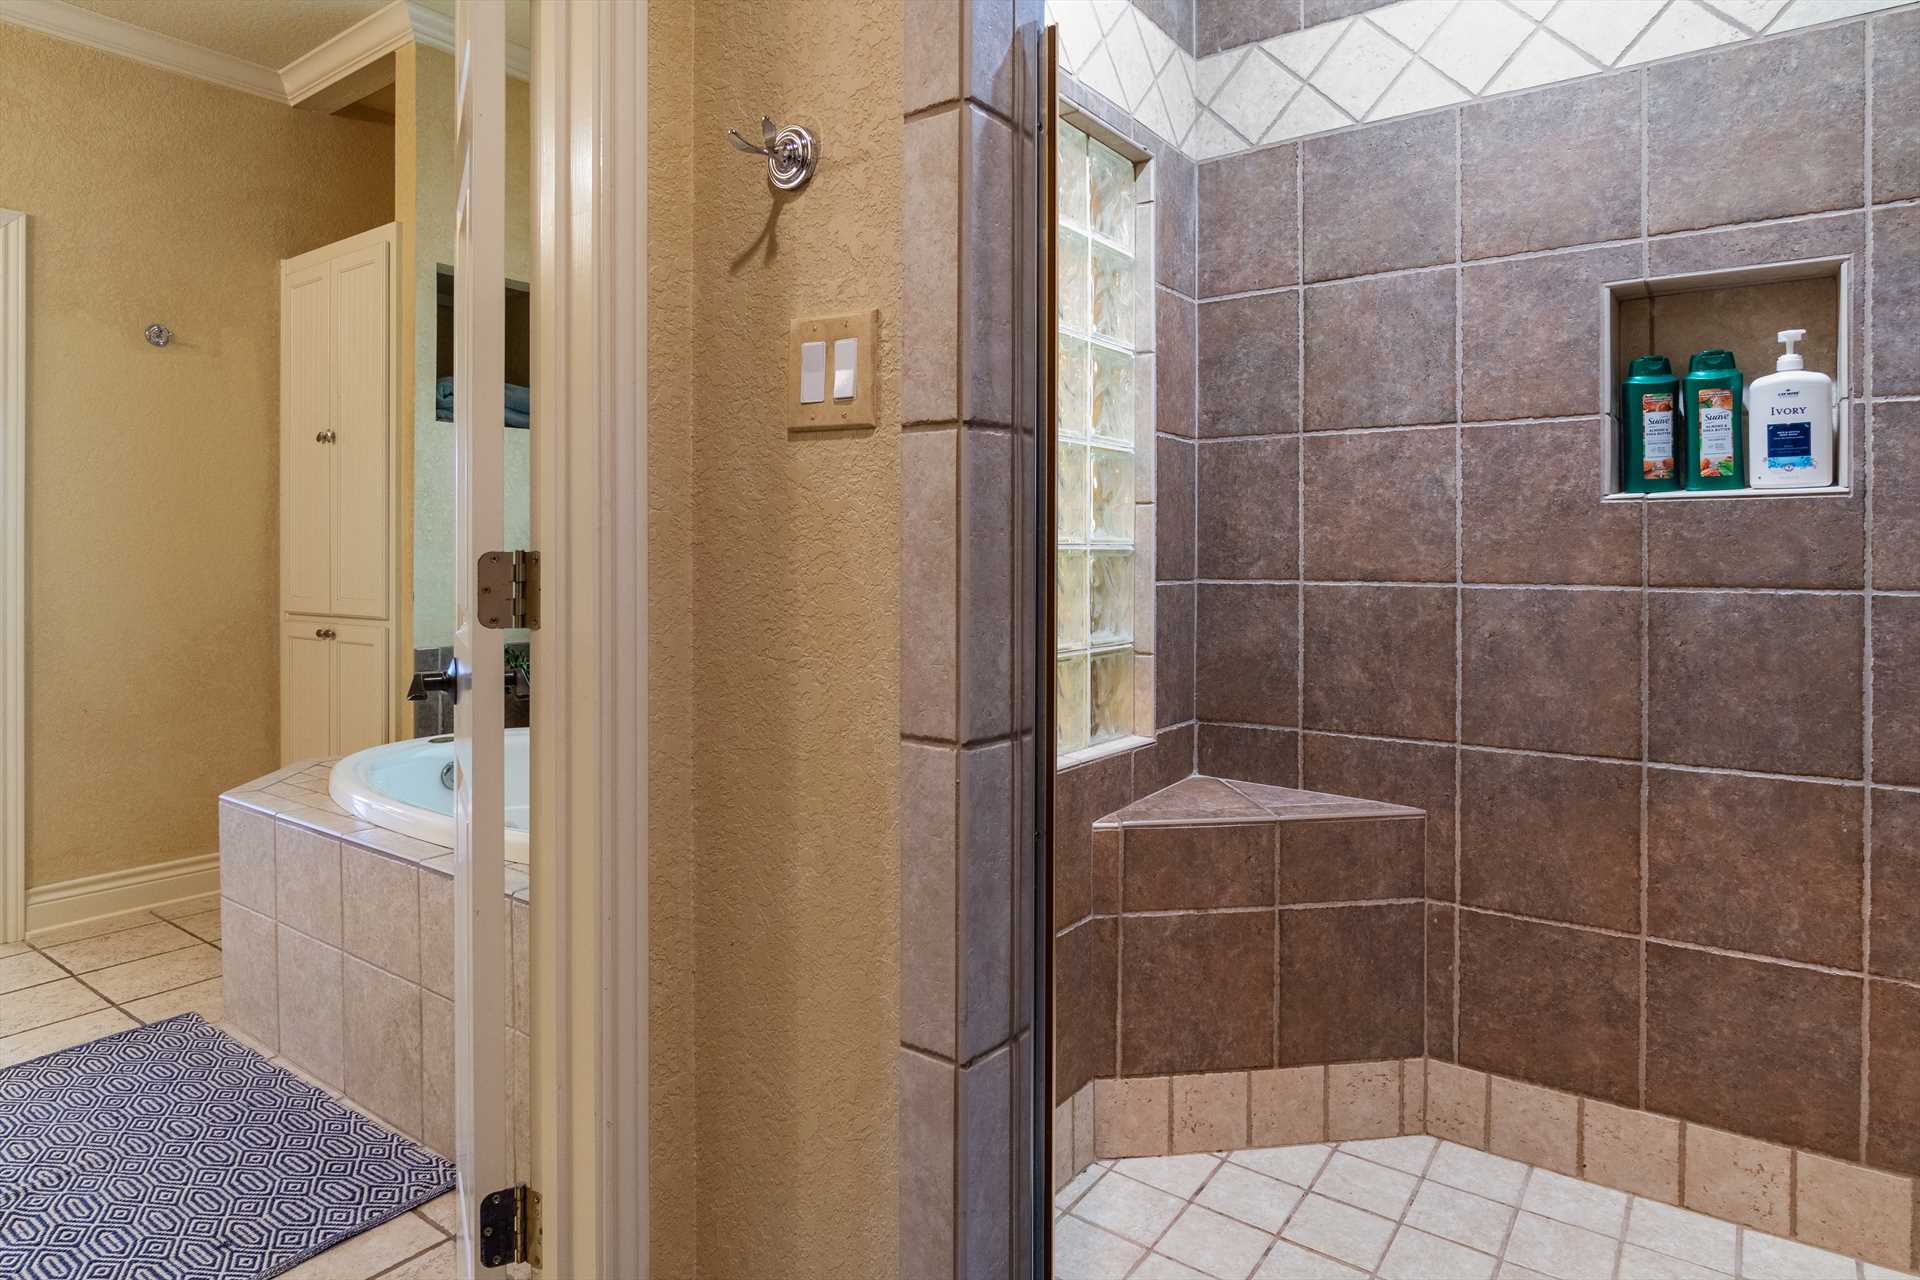                                                 Just beyond the Jacuzzi in the master bath, you'll also find a spacious and luxurious walk-in shower.